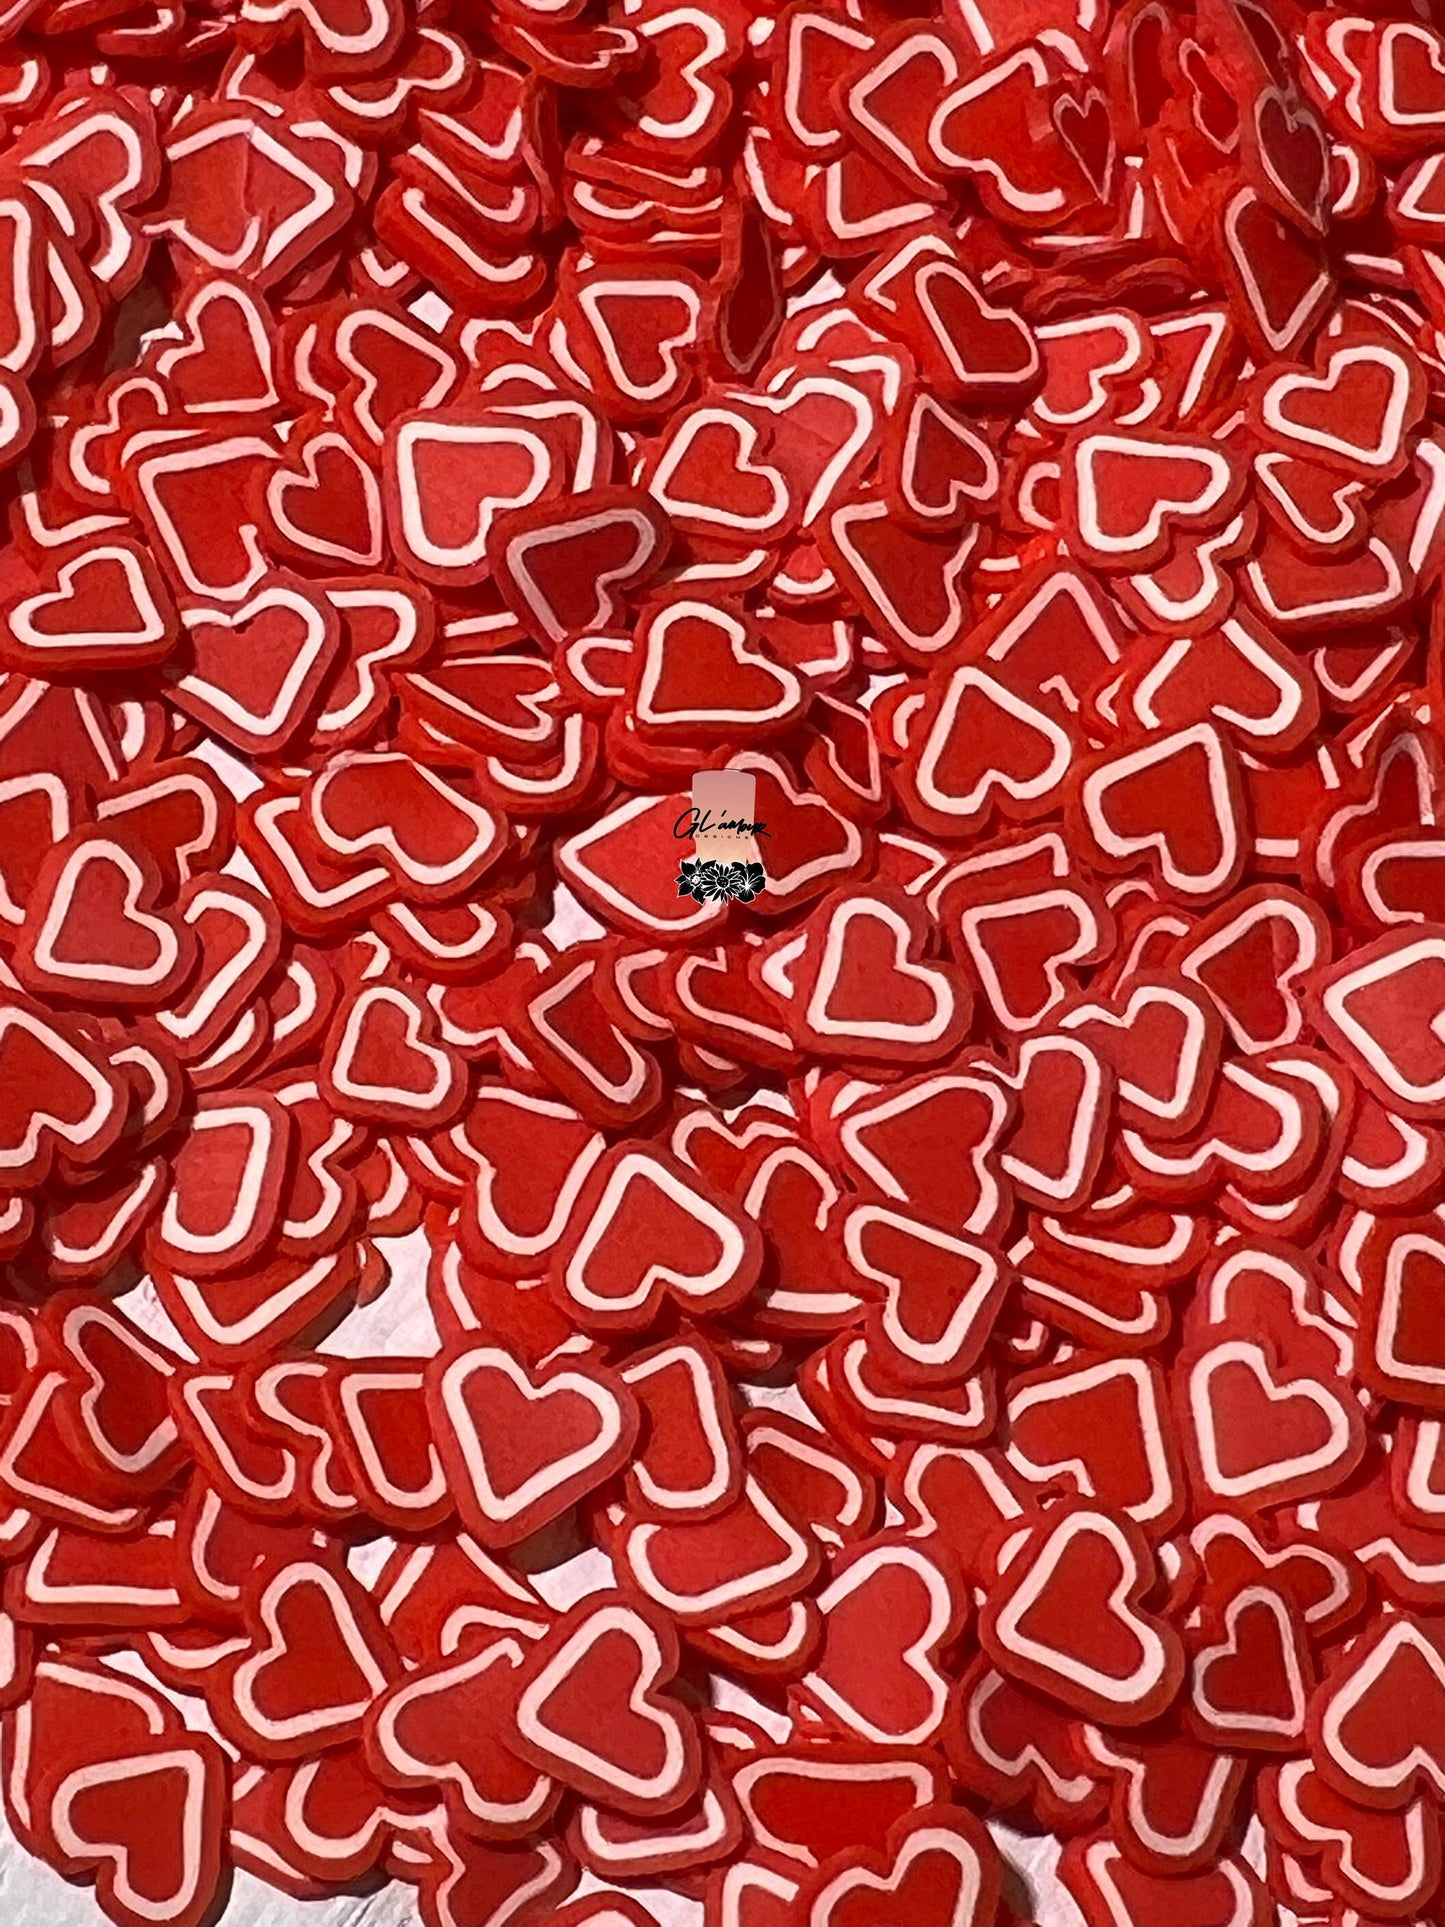 Red and White Heart Polymer Slices - small 5mm